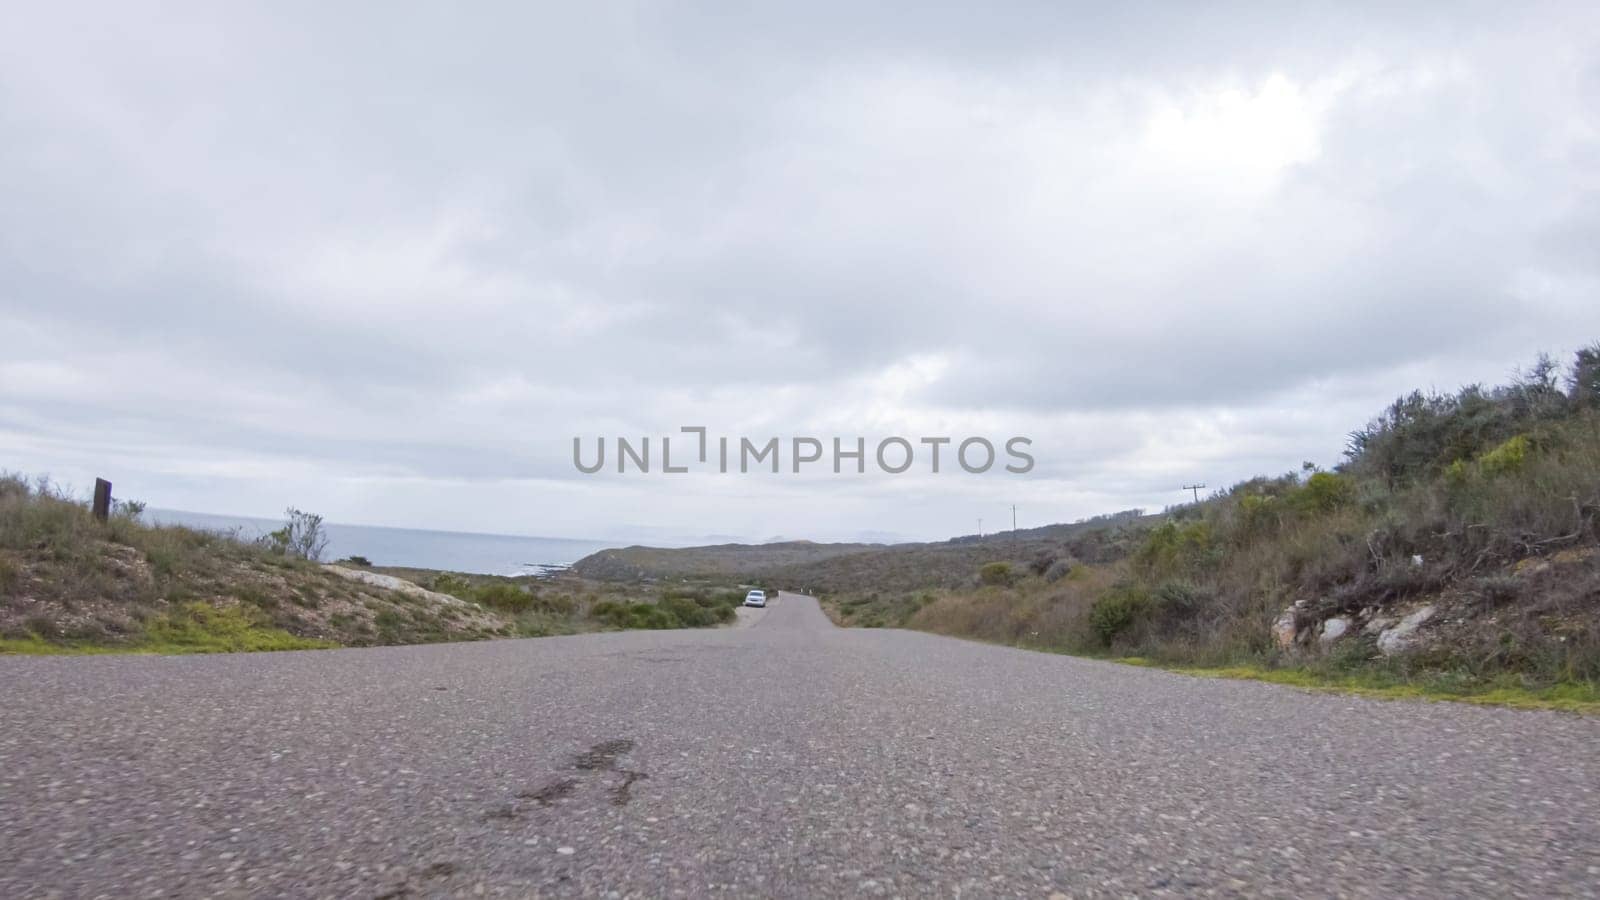 In this serene winter scene, a vehicle carefully makes its way along Los Osos Valley Road and Pecho Valley Road within Montana de Oro State Park.